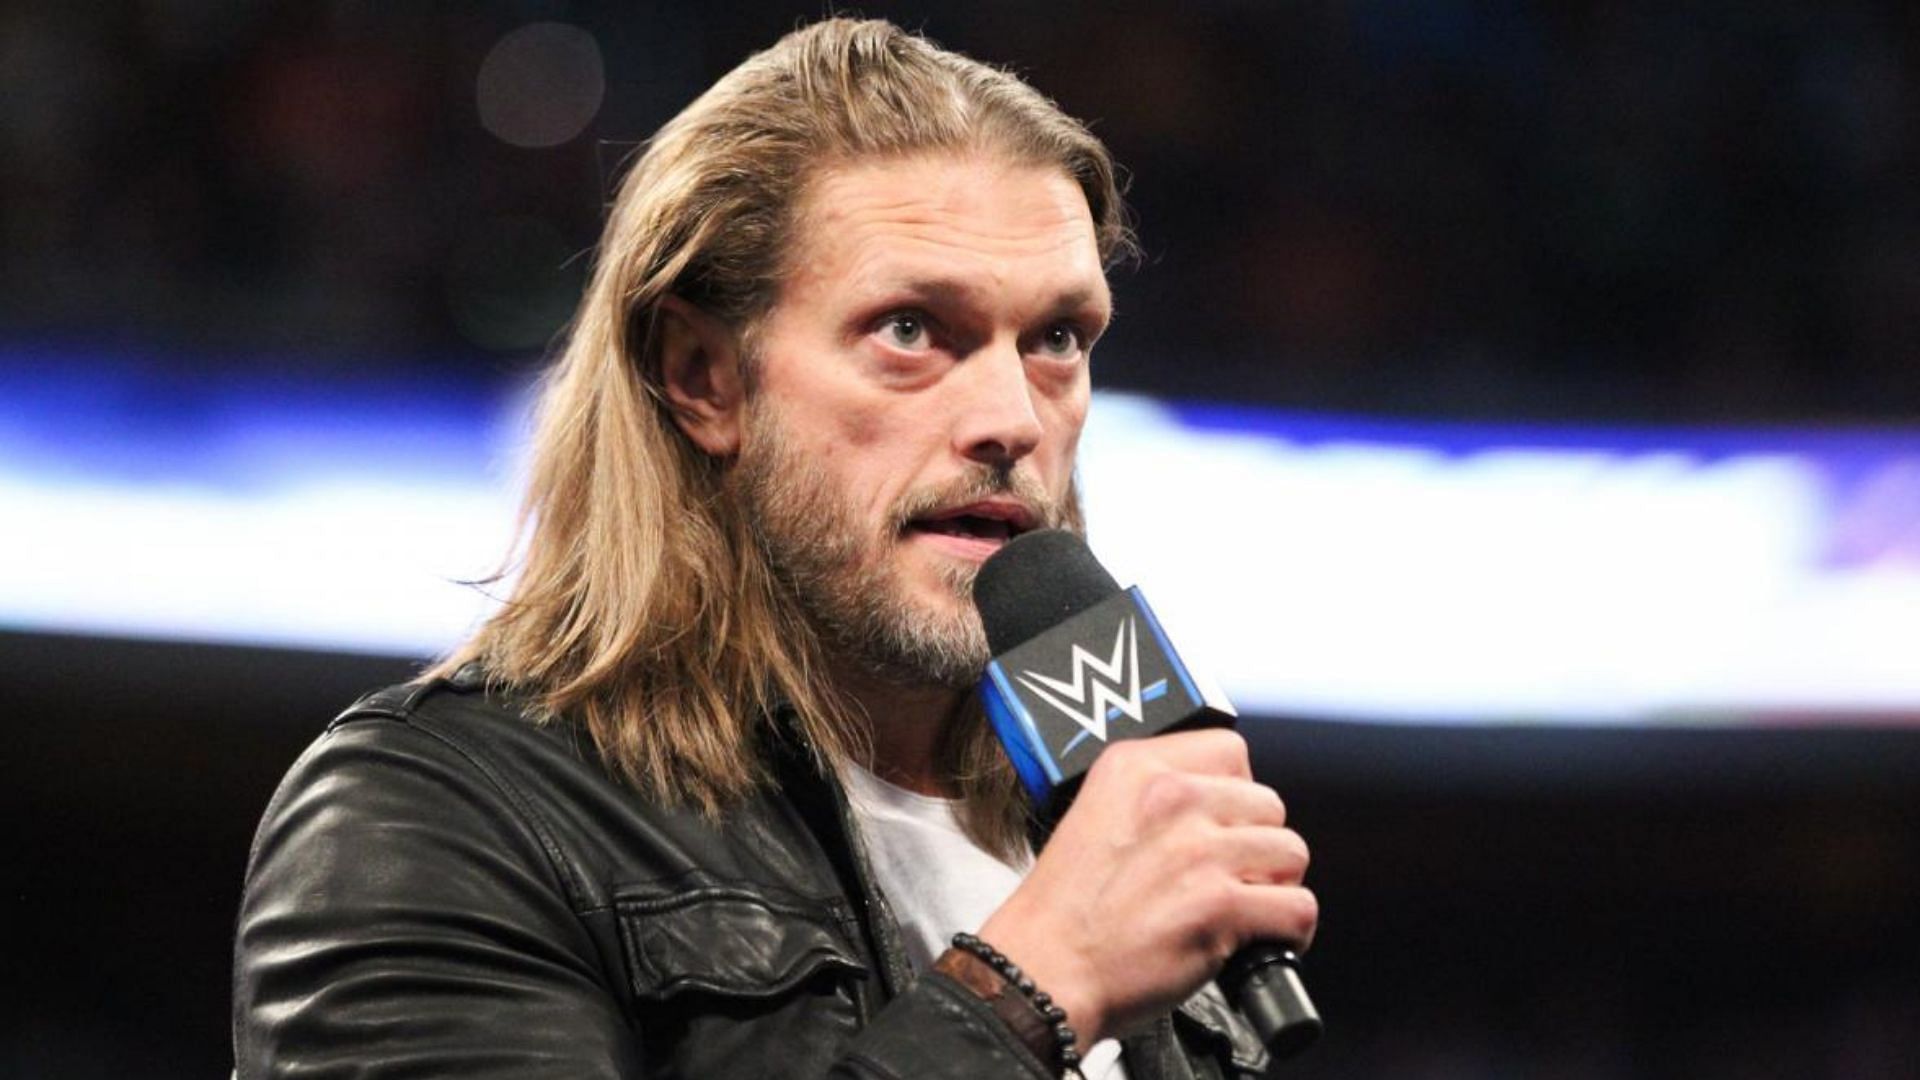 Edge has been off WWE television for several weeks